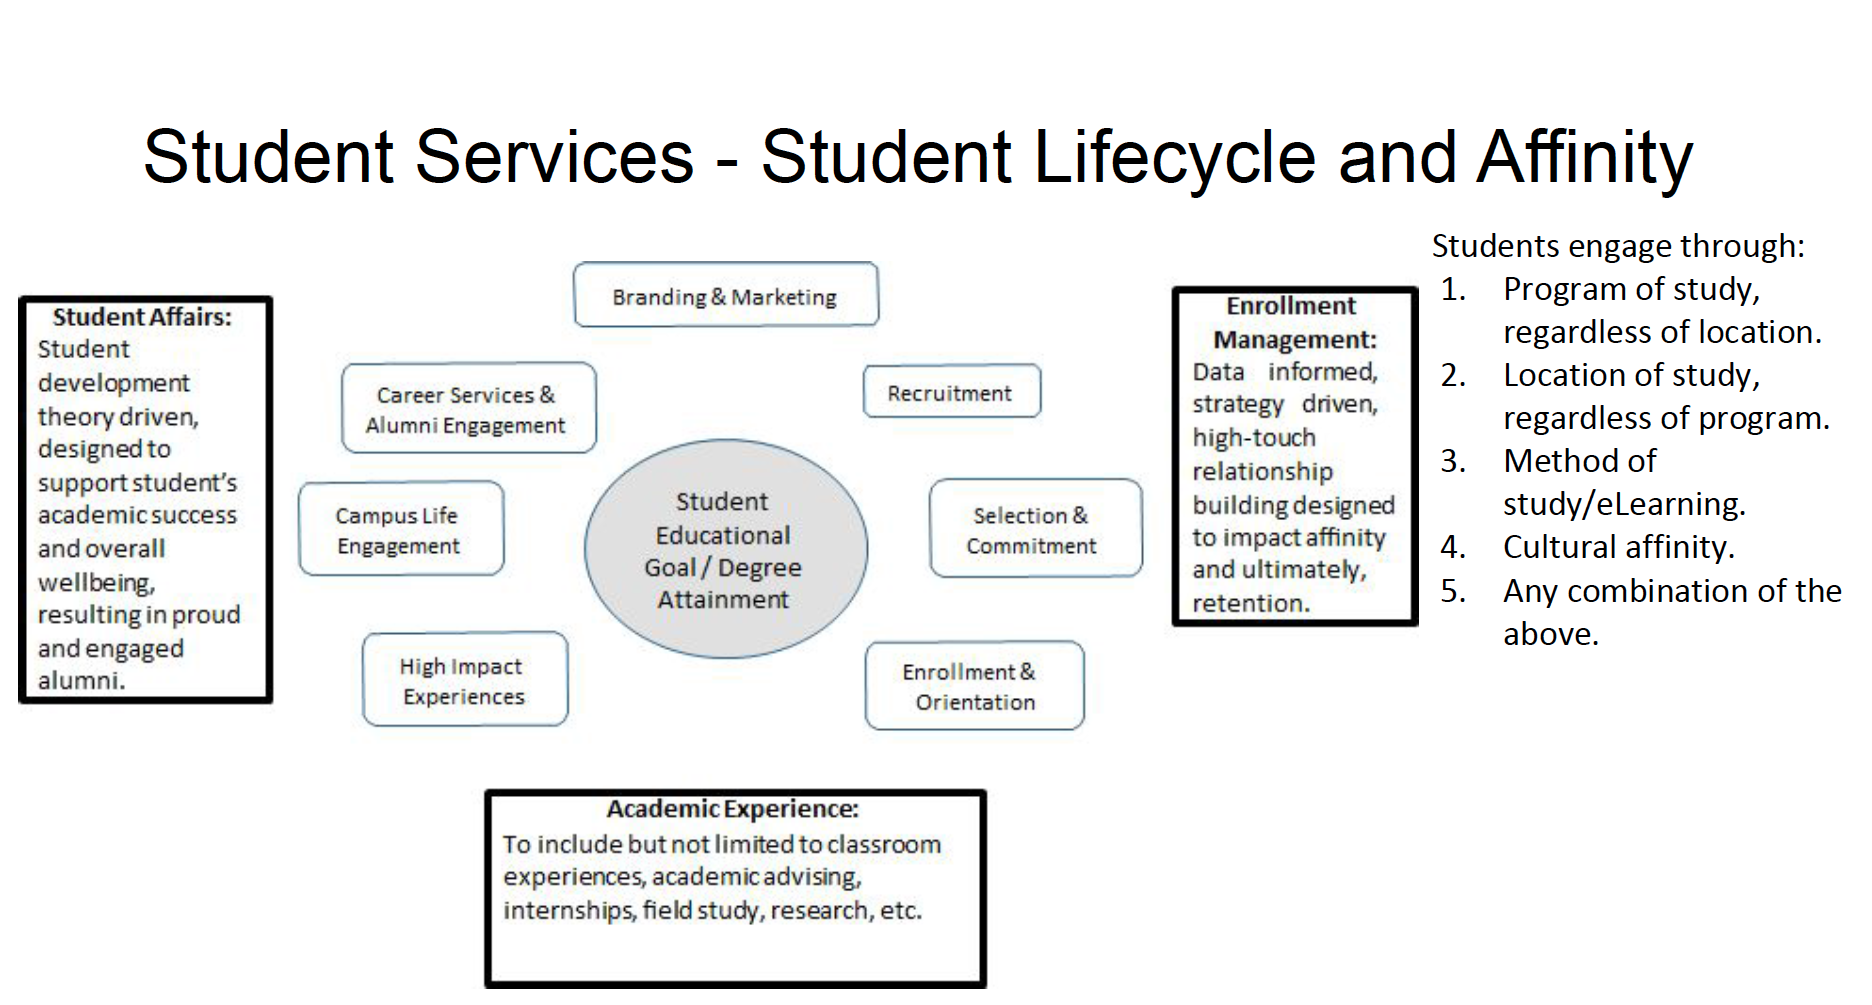 Student Life Cycle